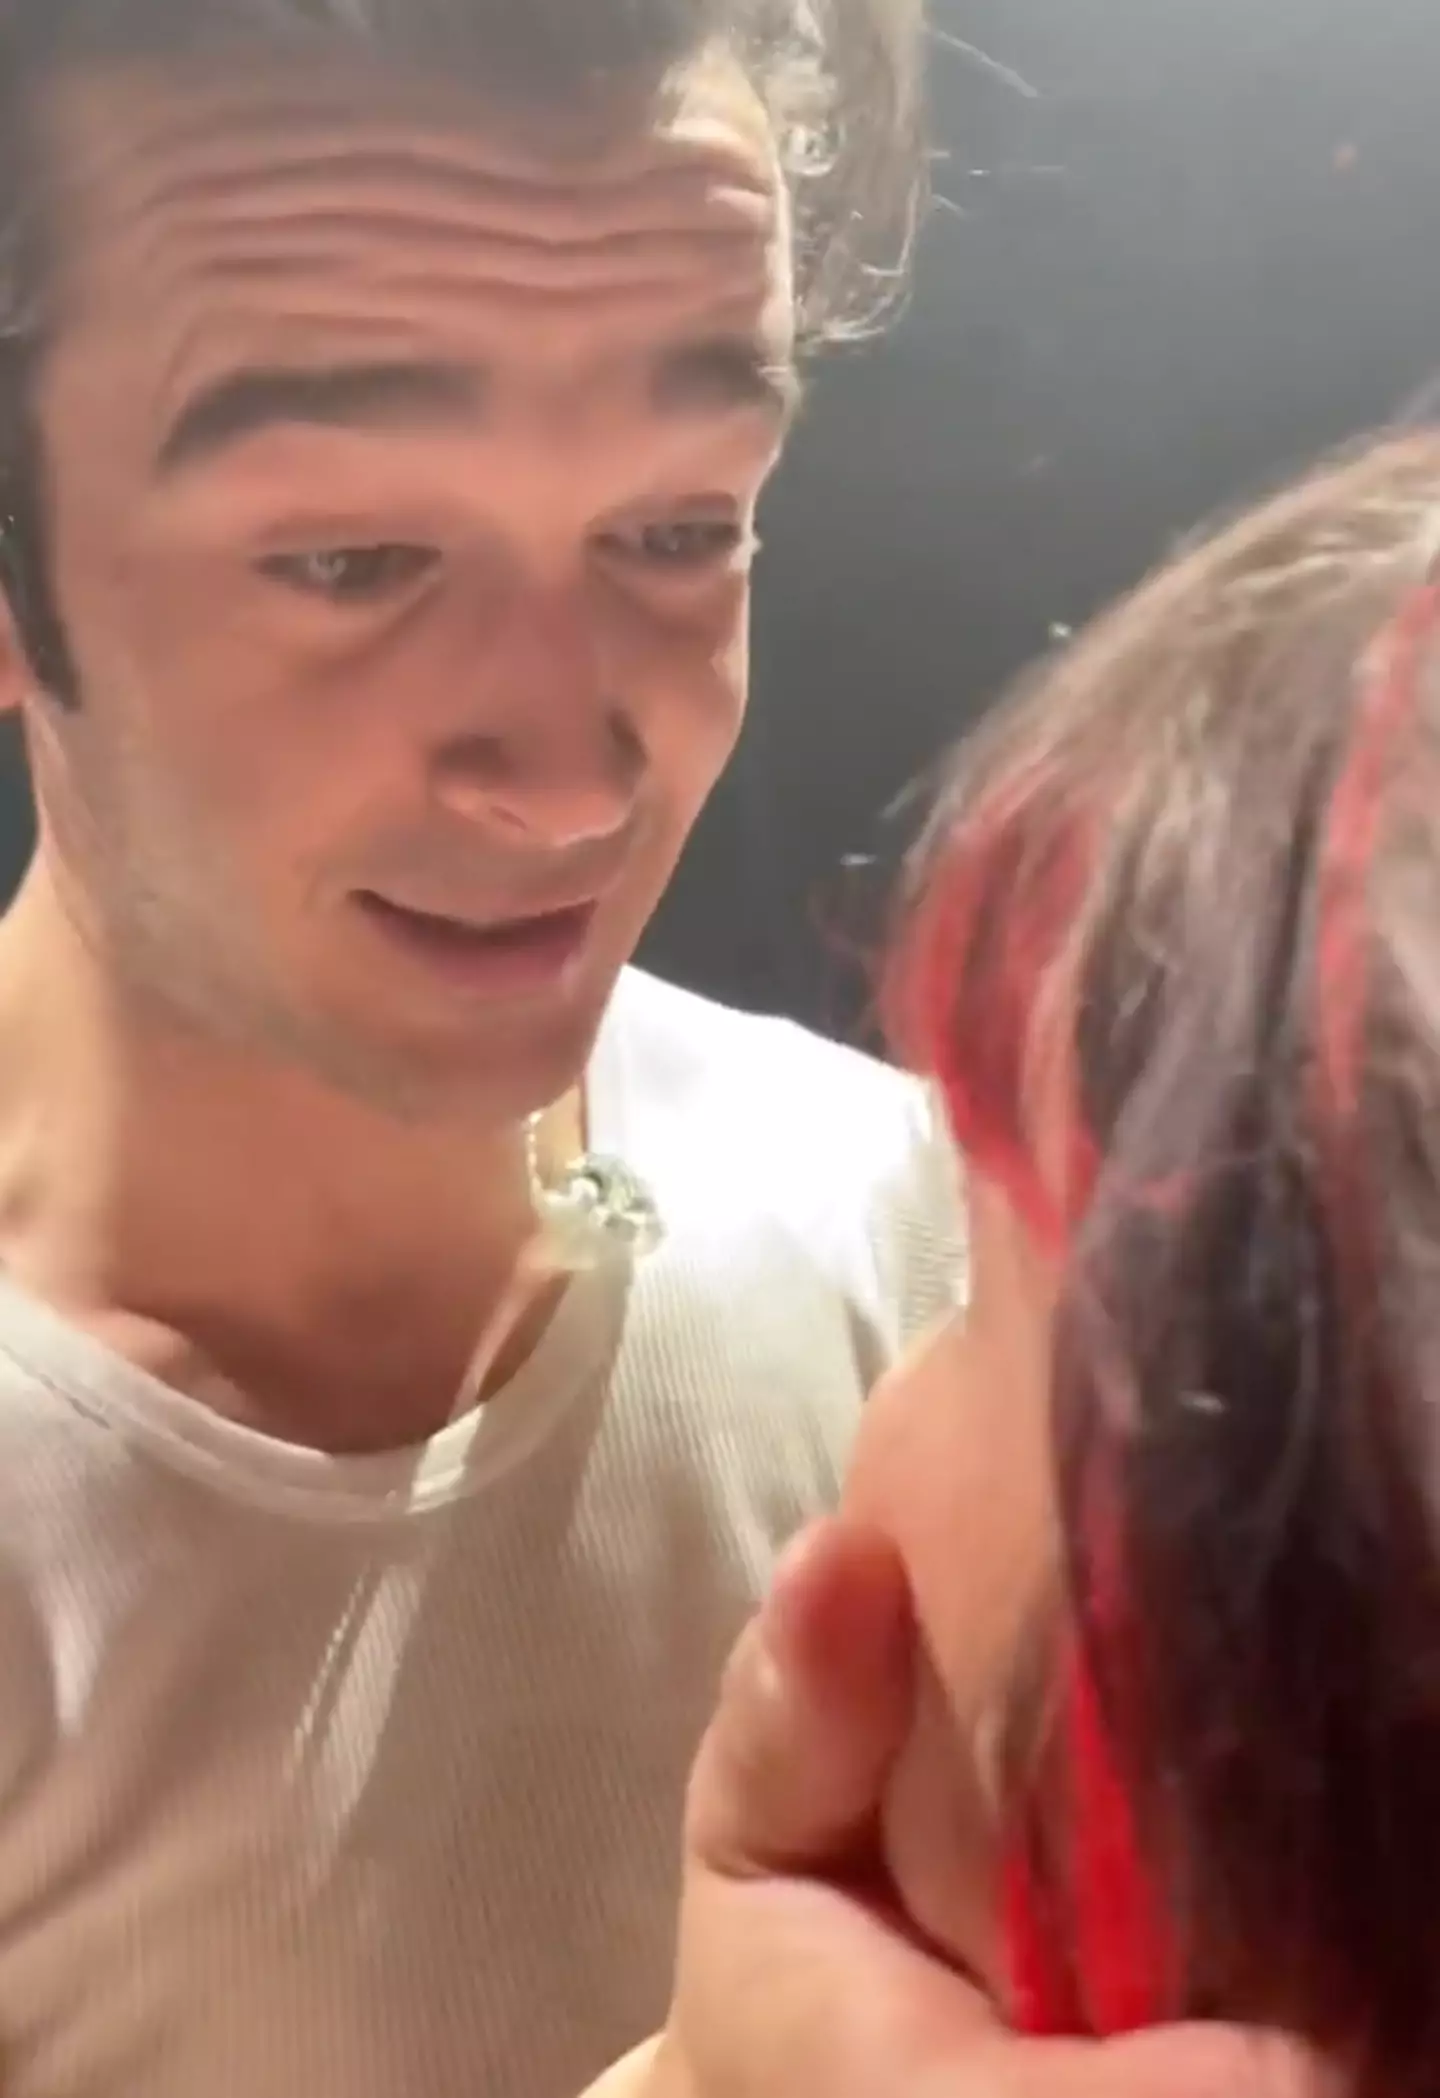 Healy also asked her twice more if she wanted to kiss him.